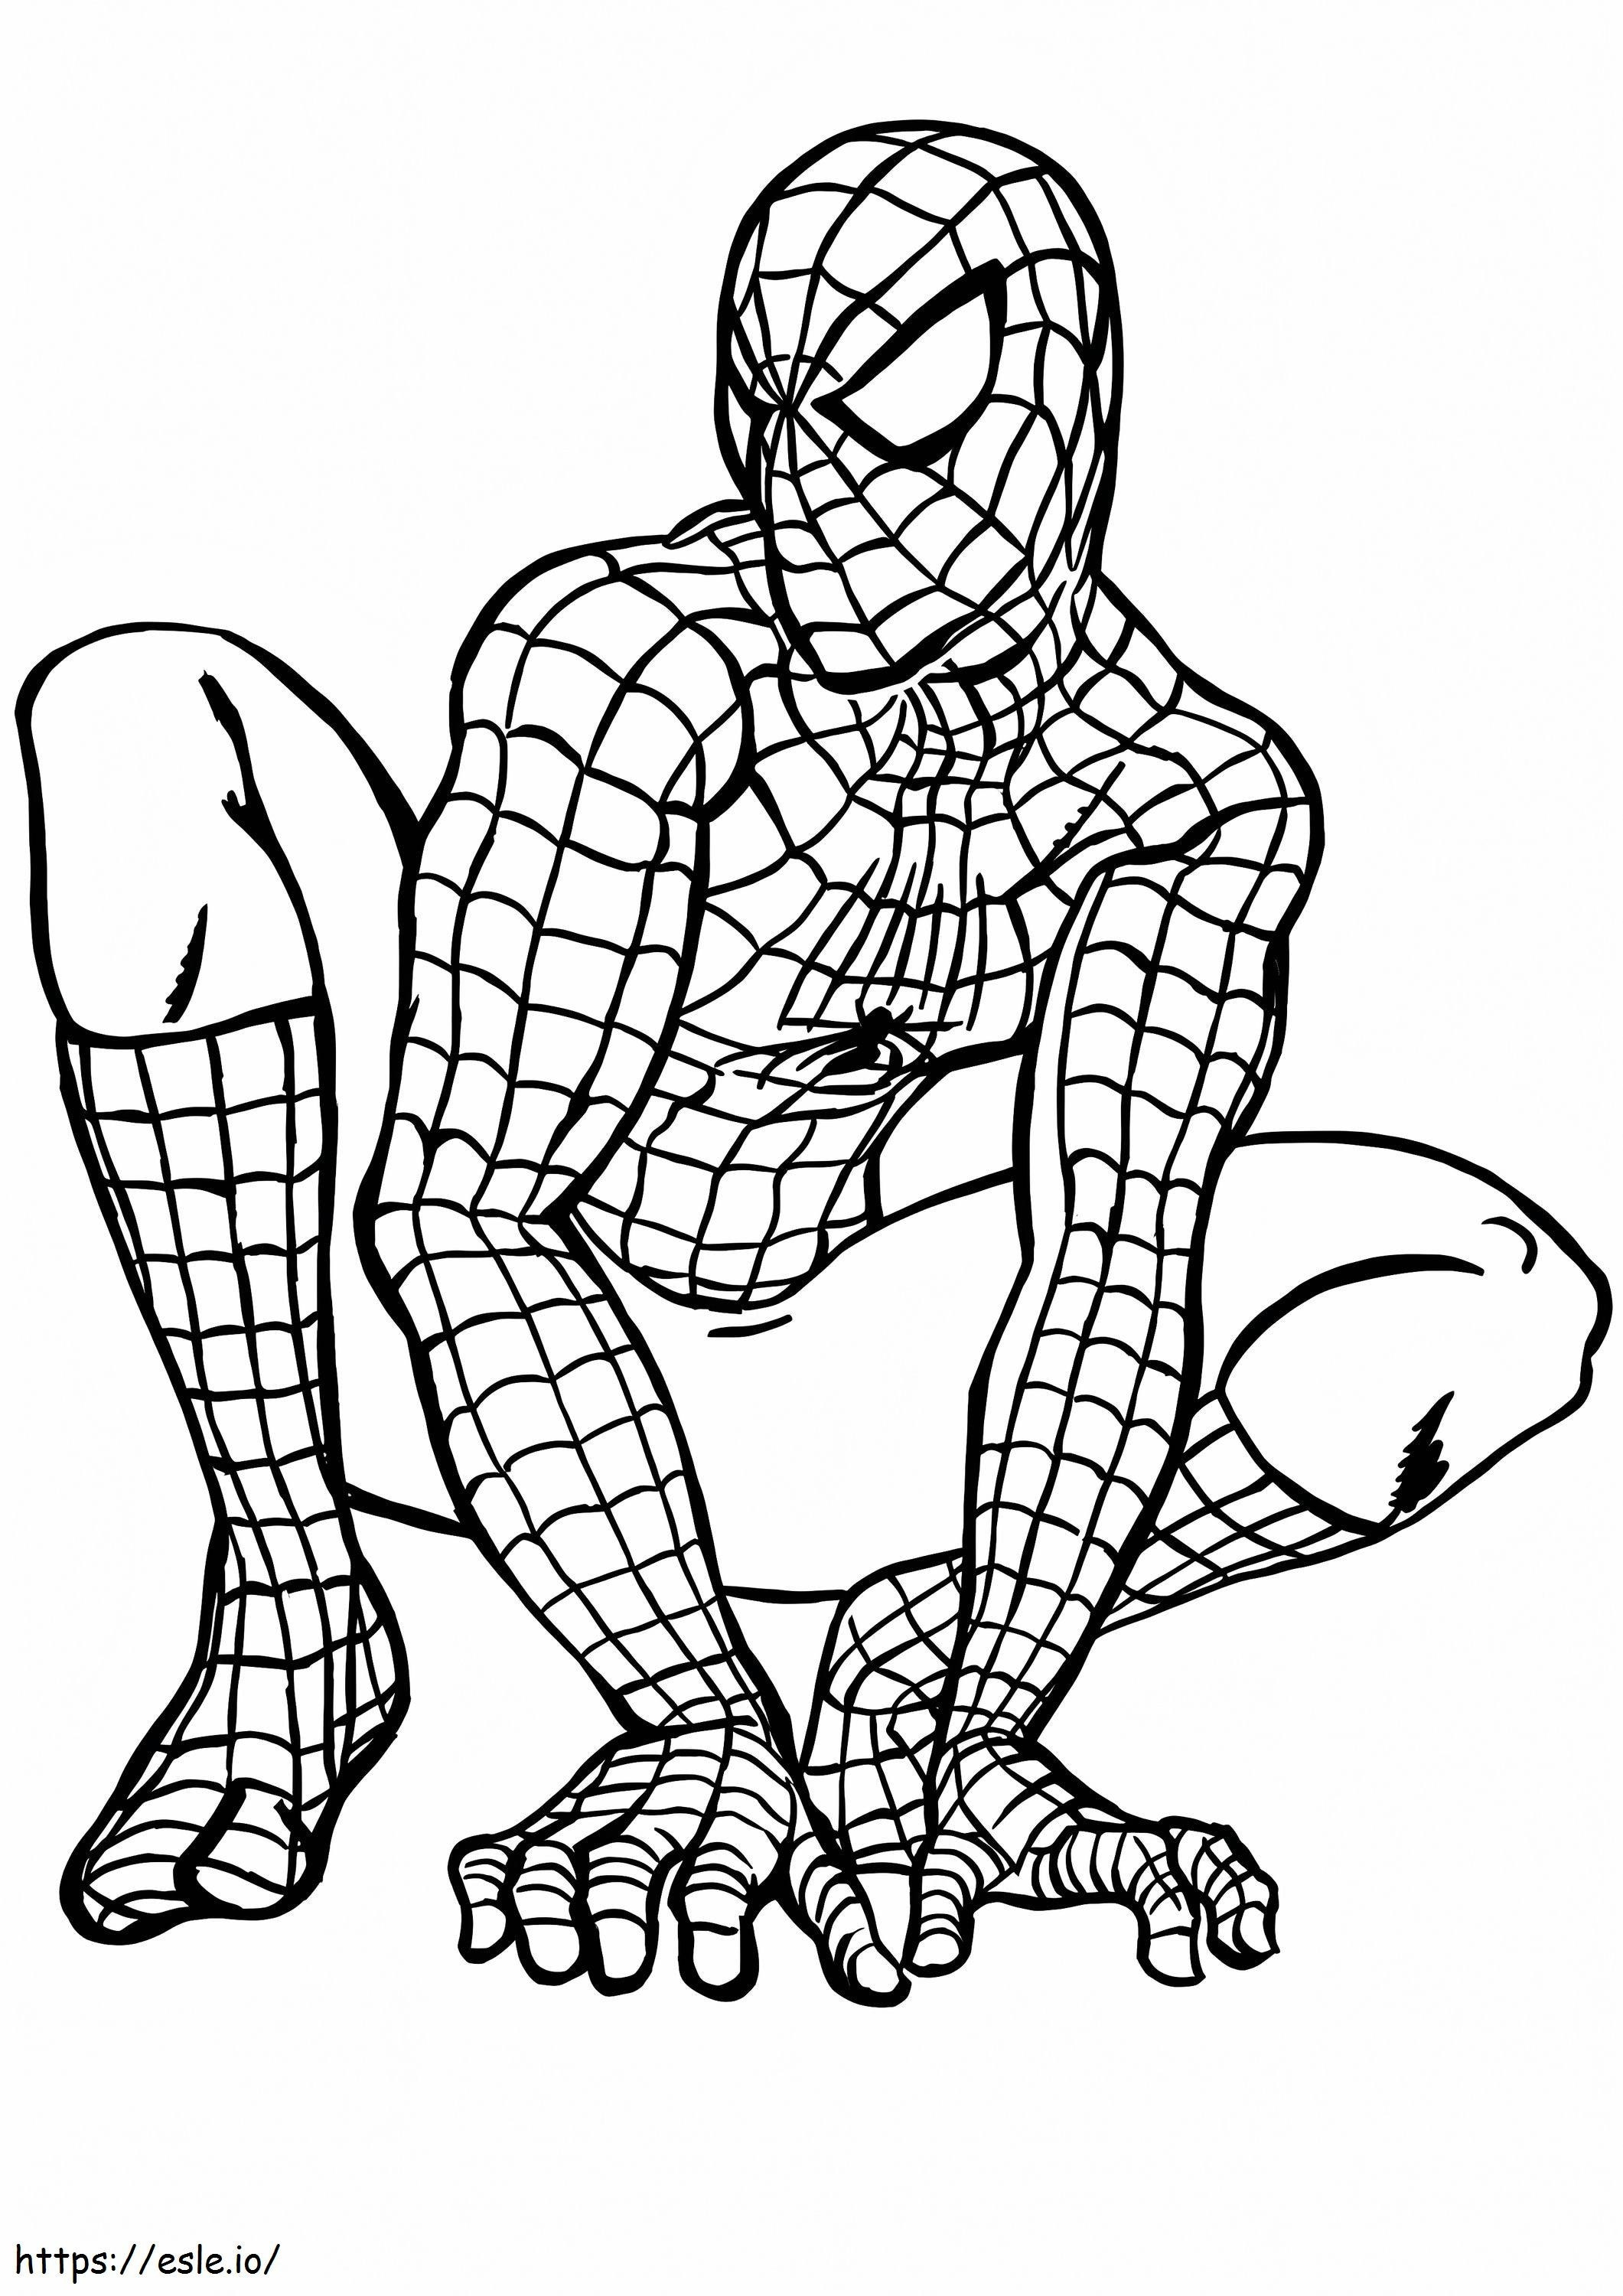 Nice Spider Man coloring page